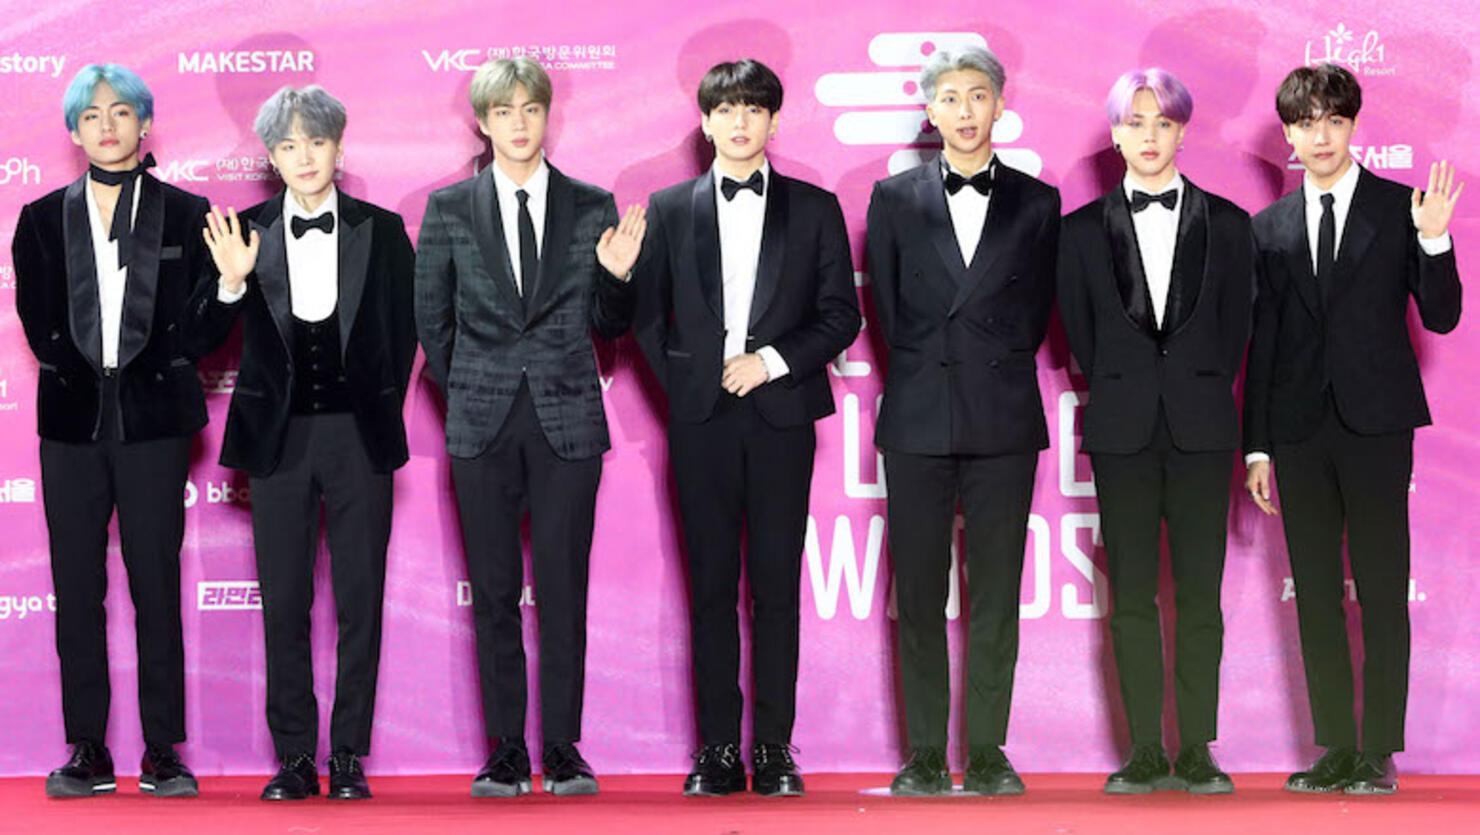 BTS will attend the Grammys to present an award